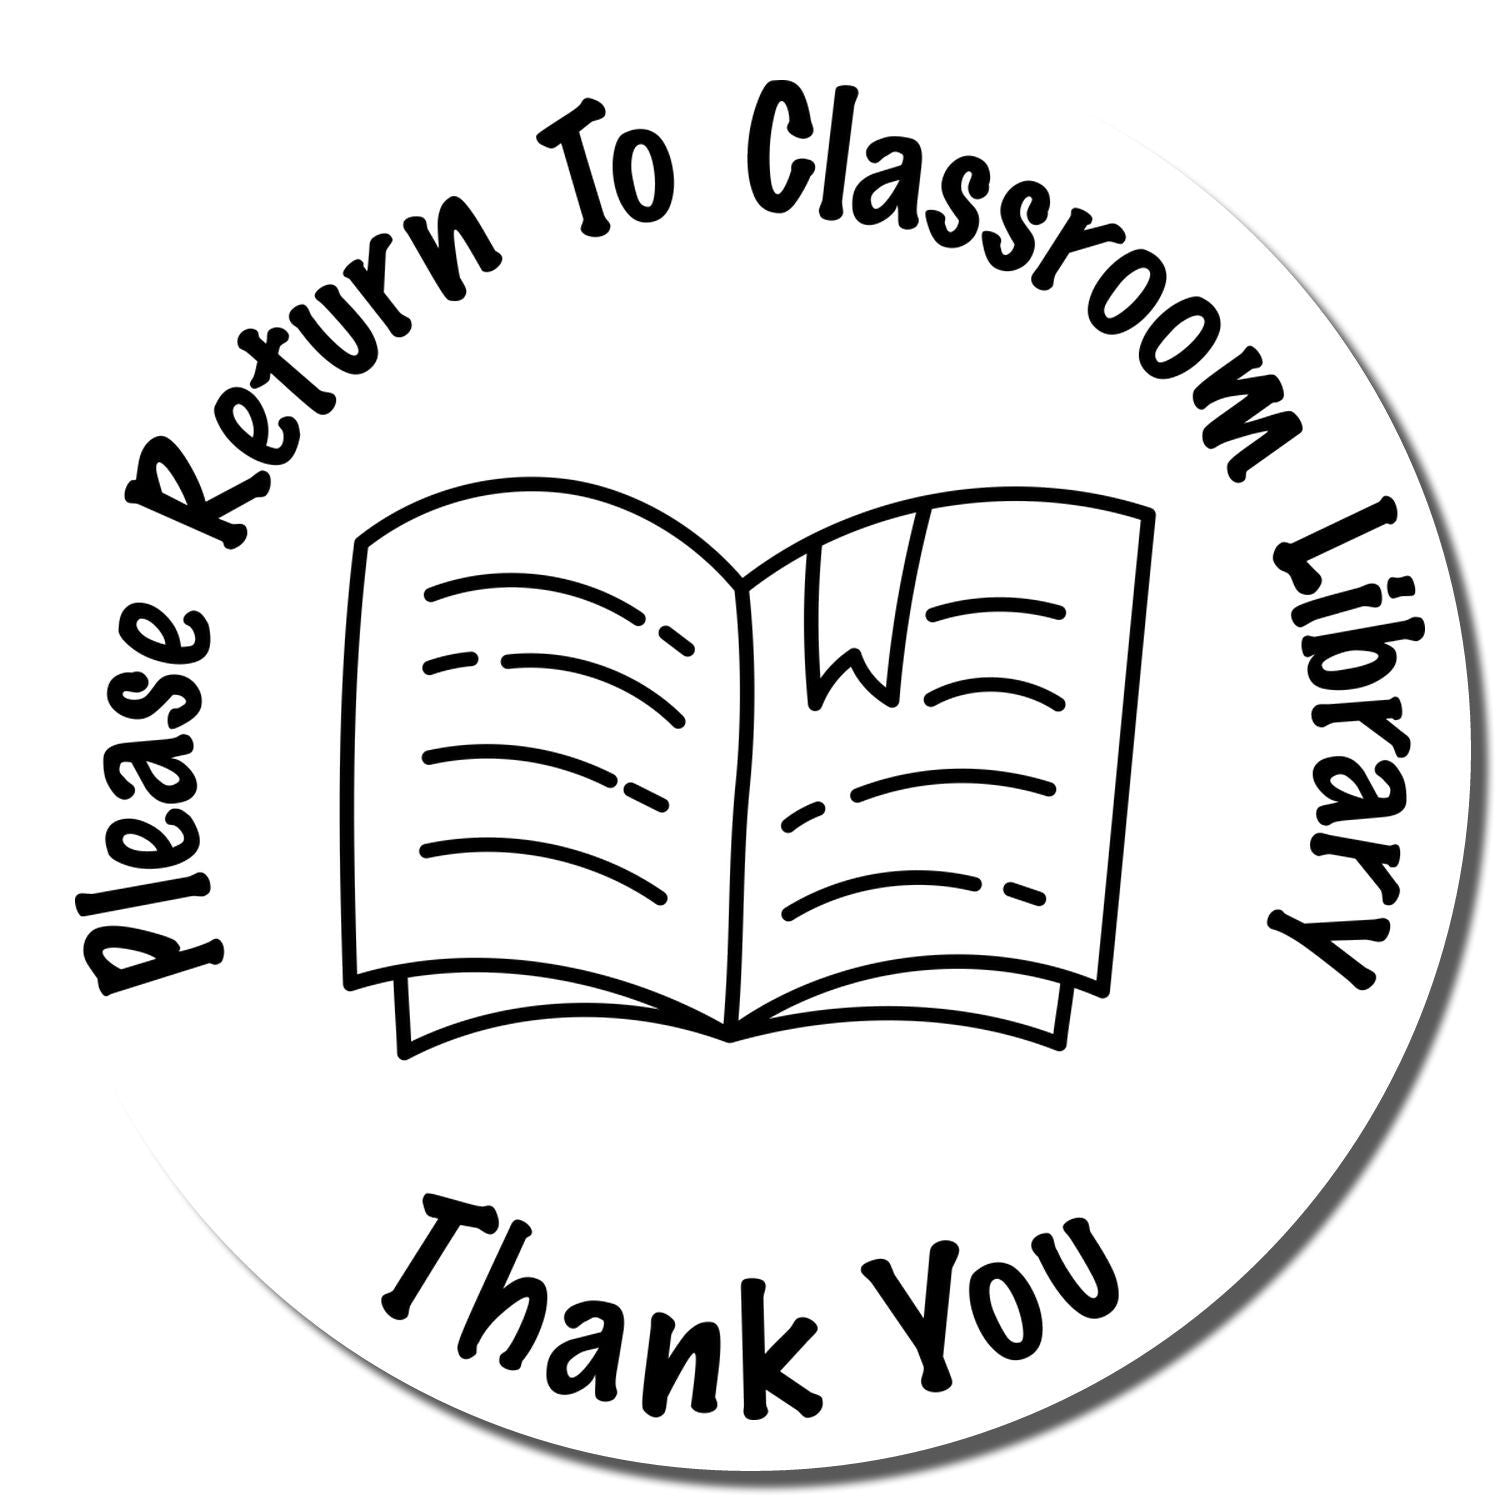 Enlarged Imprint Self-Inking Round Please Return to Classroom Library Stamp Sample